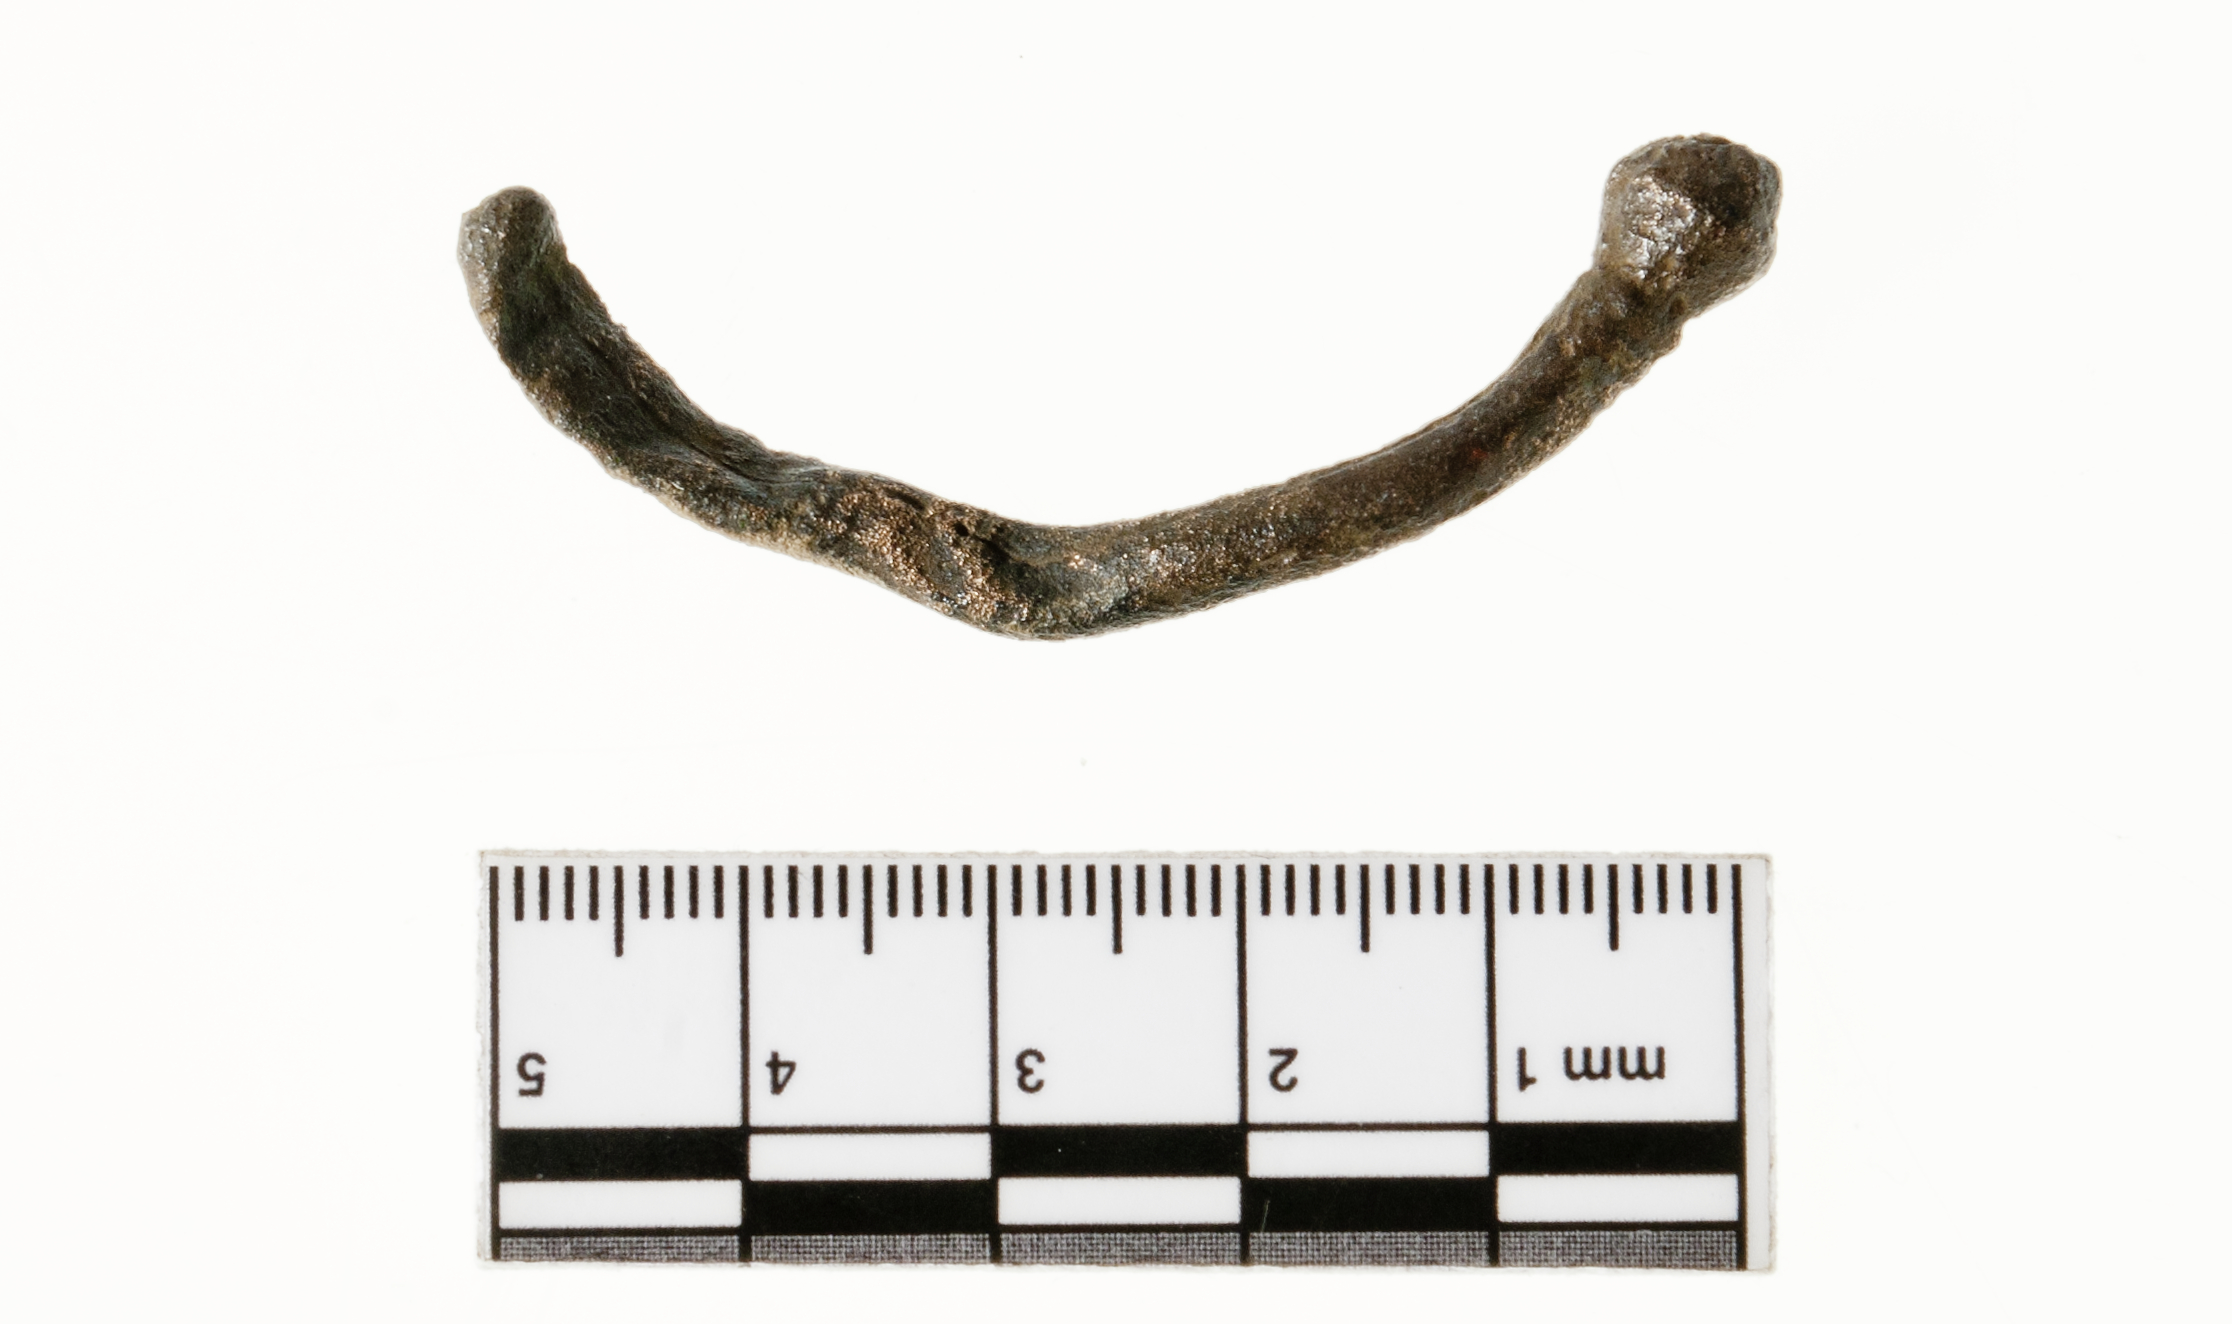 Early Medieval copper alloy pin